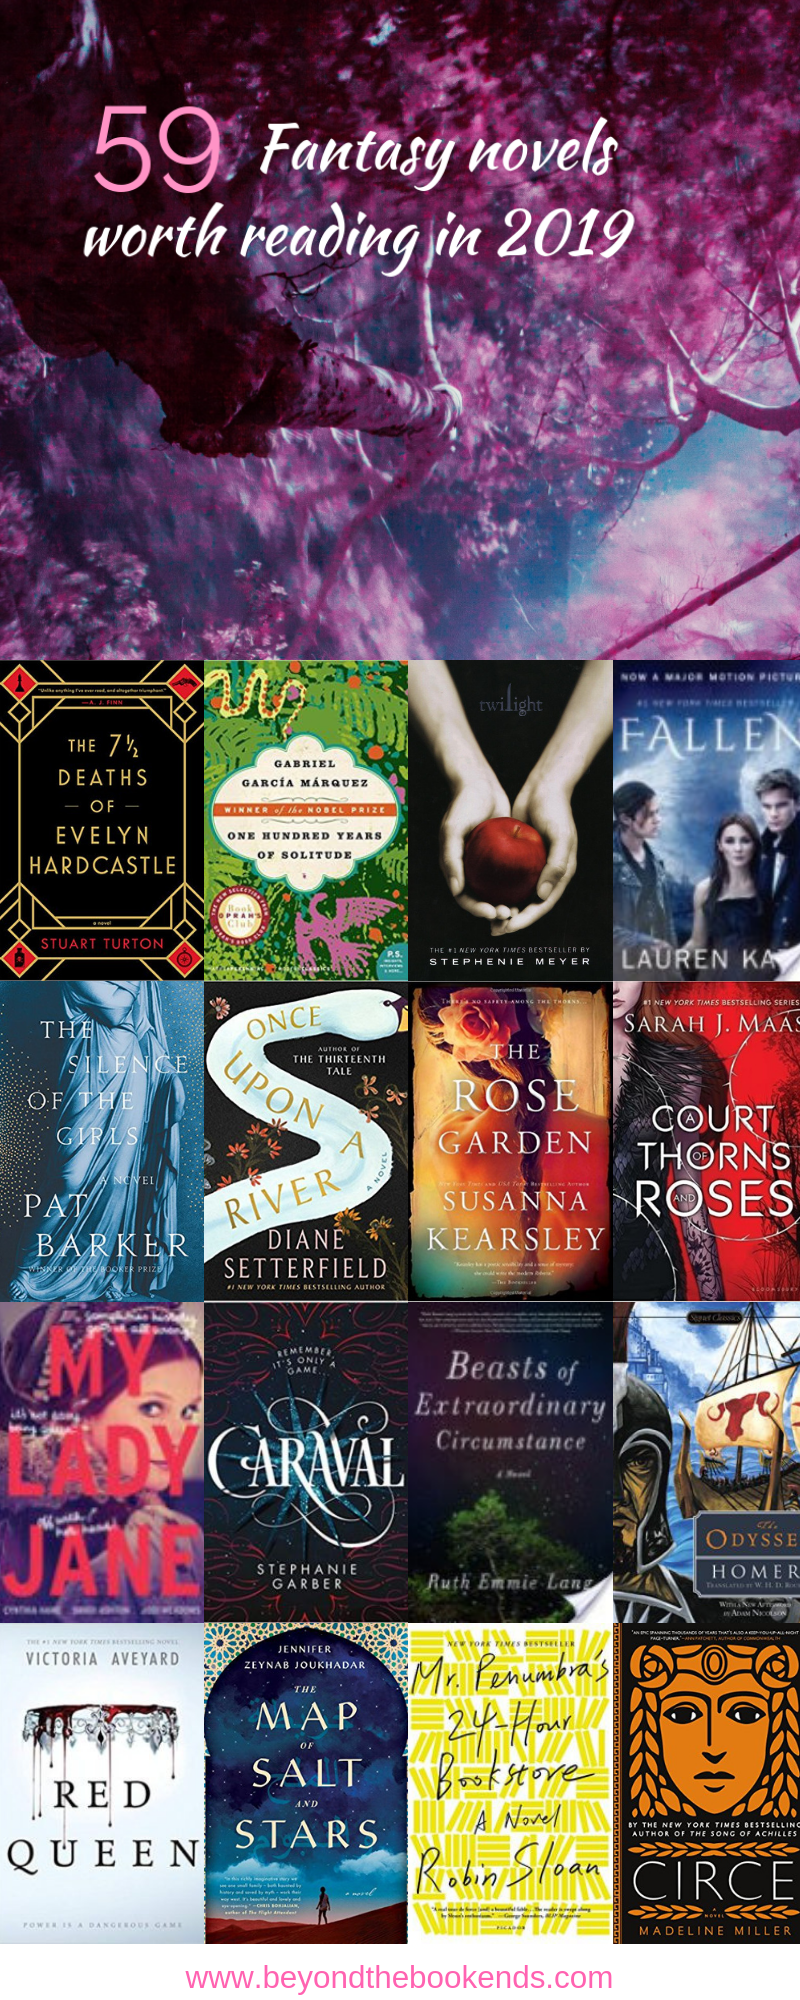 Looking for fantasy fiction reads? Whether you want to read magical realism, vampire romance, books about the gods, or historical fiction fantasy, this extensive list of 59 books has you covered. Find the perfect fantasy reads for 2019!